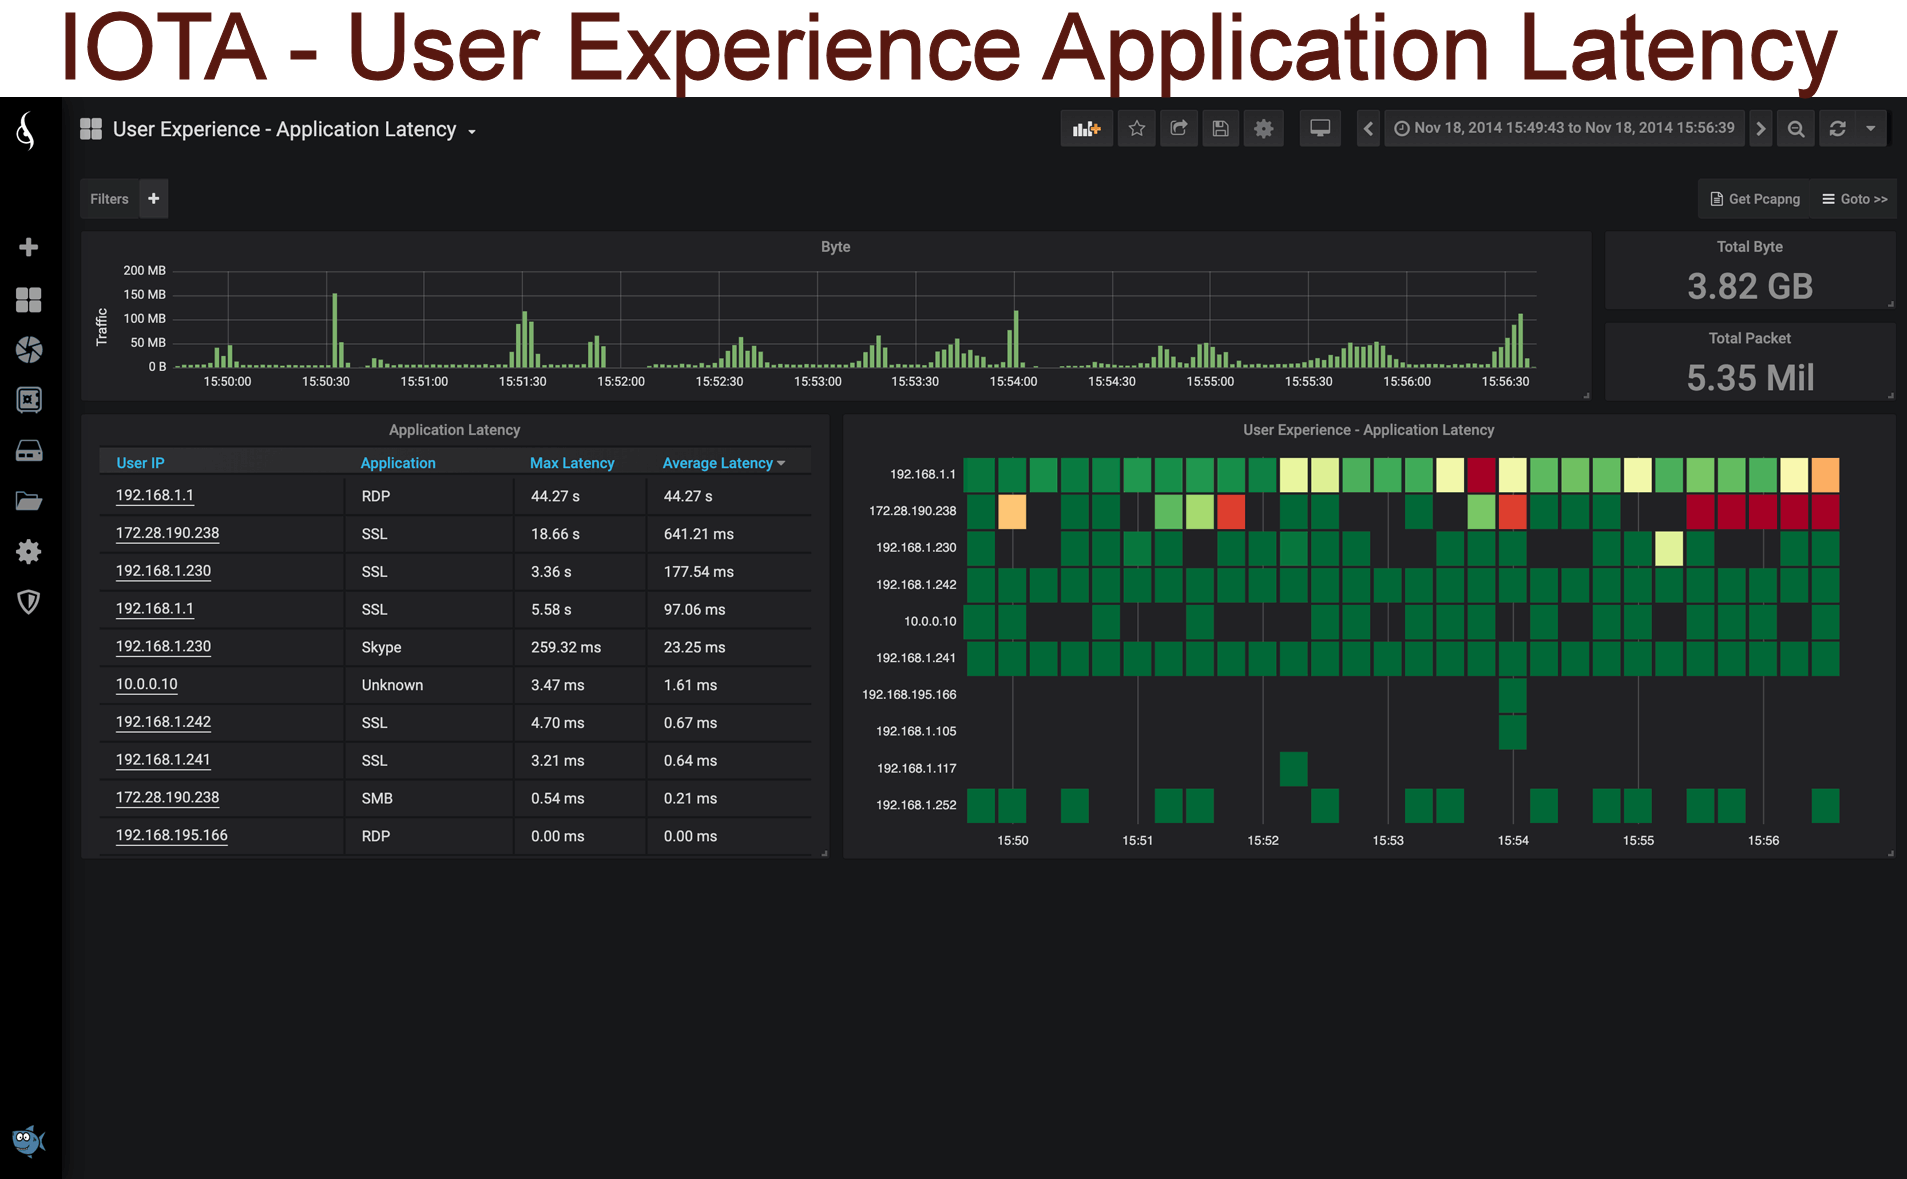 User Experience - Application Latency